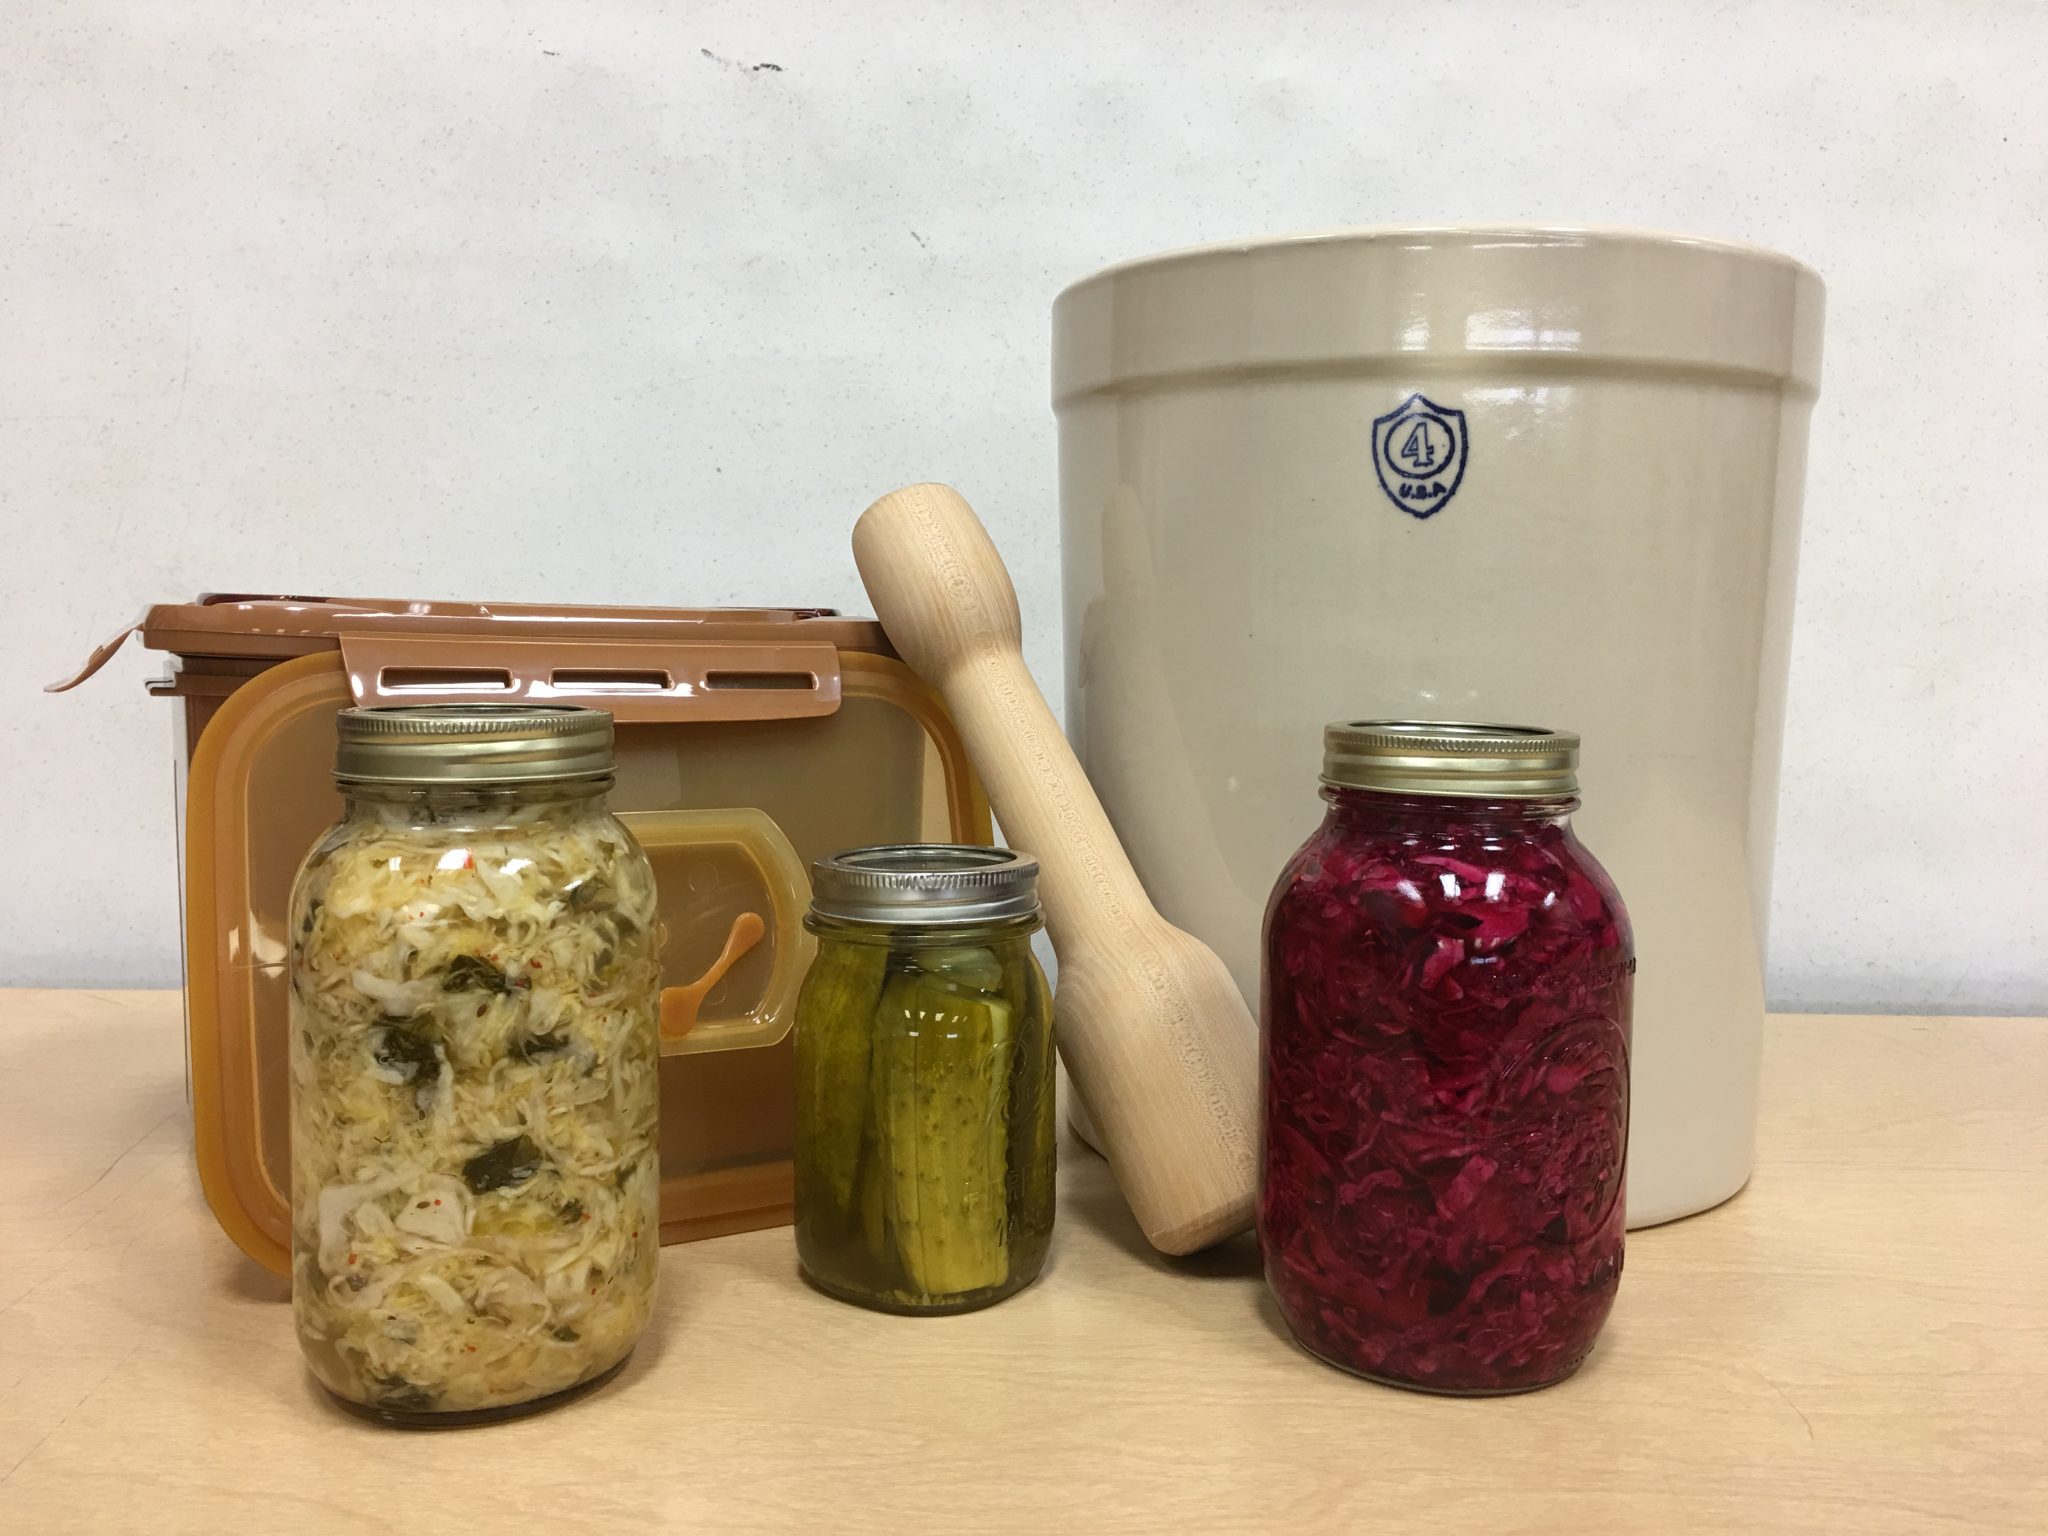 Tools used in fermentation with jars of fermented vegetables.